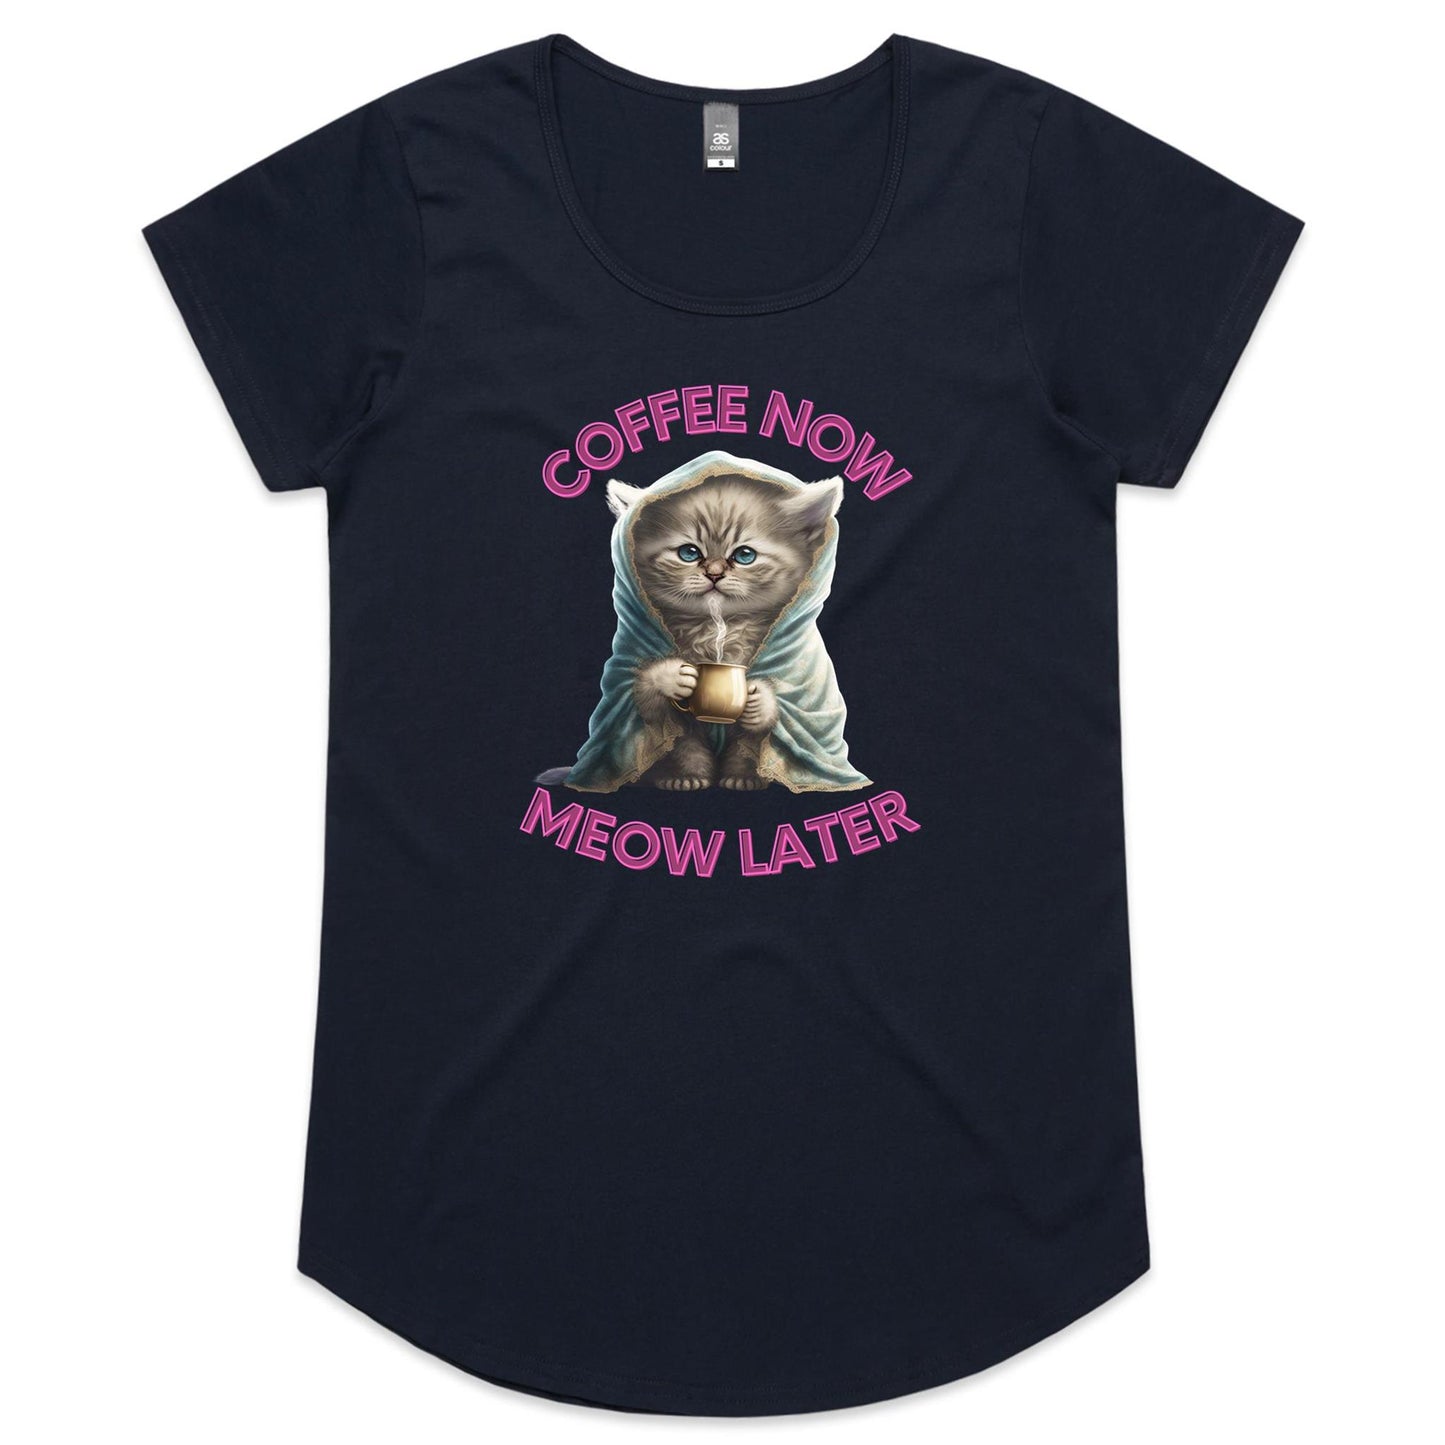 Coffee Now, Meow Later Womens Scoop Neck T-Shirt